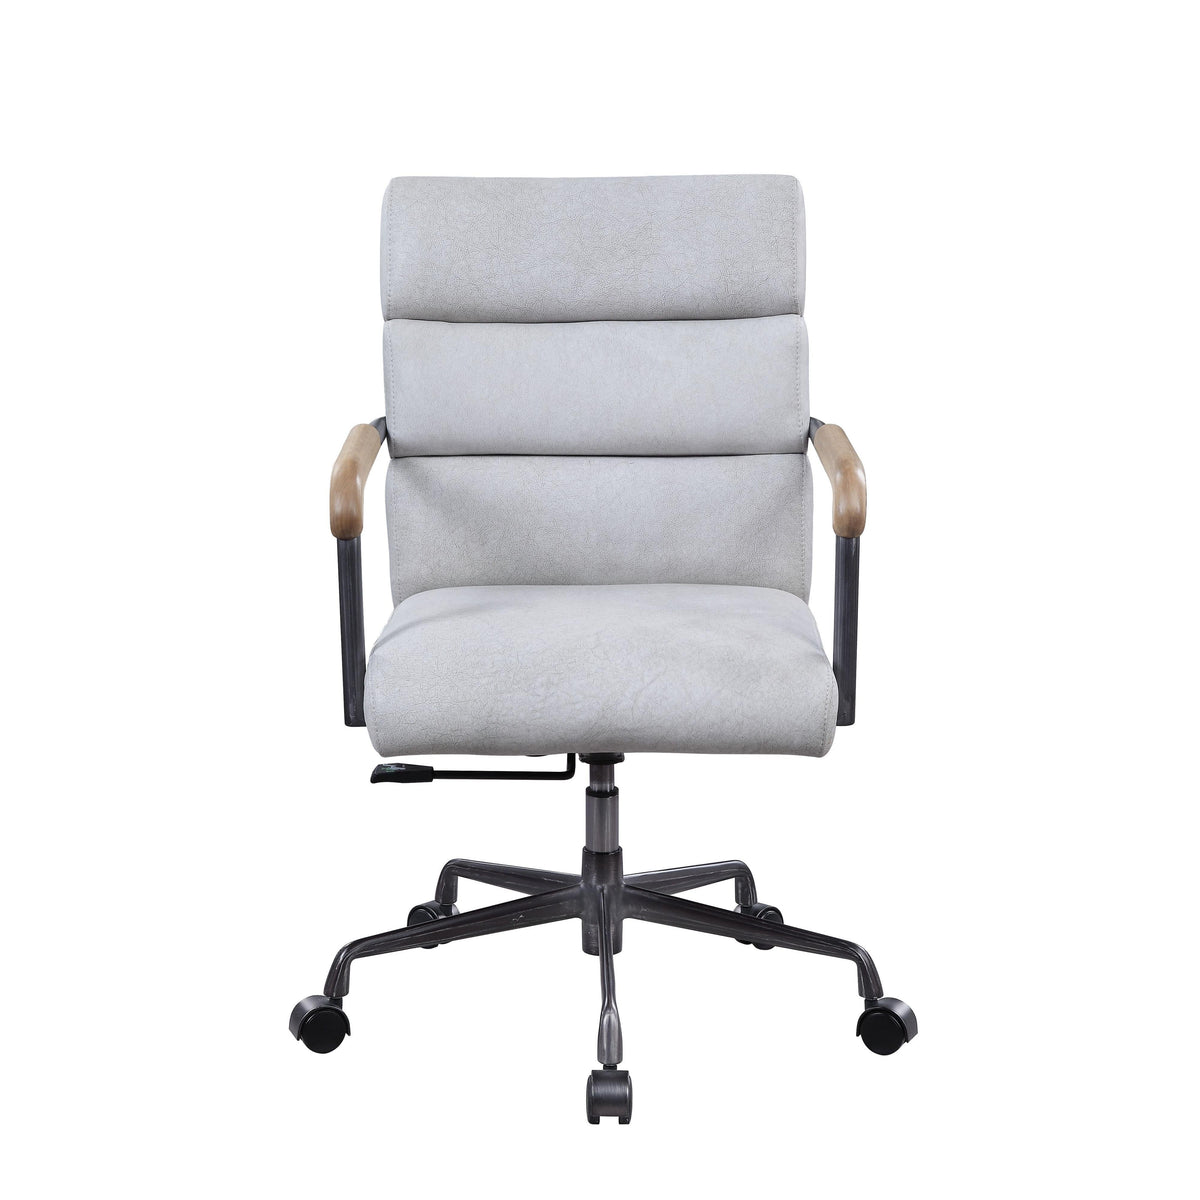 Acme Furniture Halcyon 93243 Office Chair - Vintage White